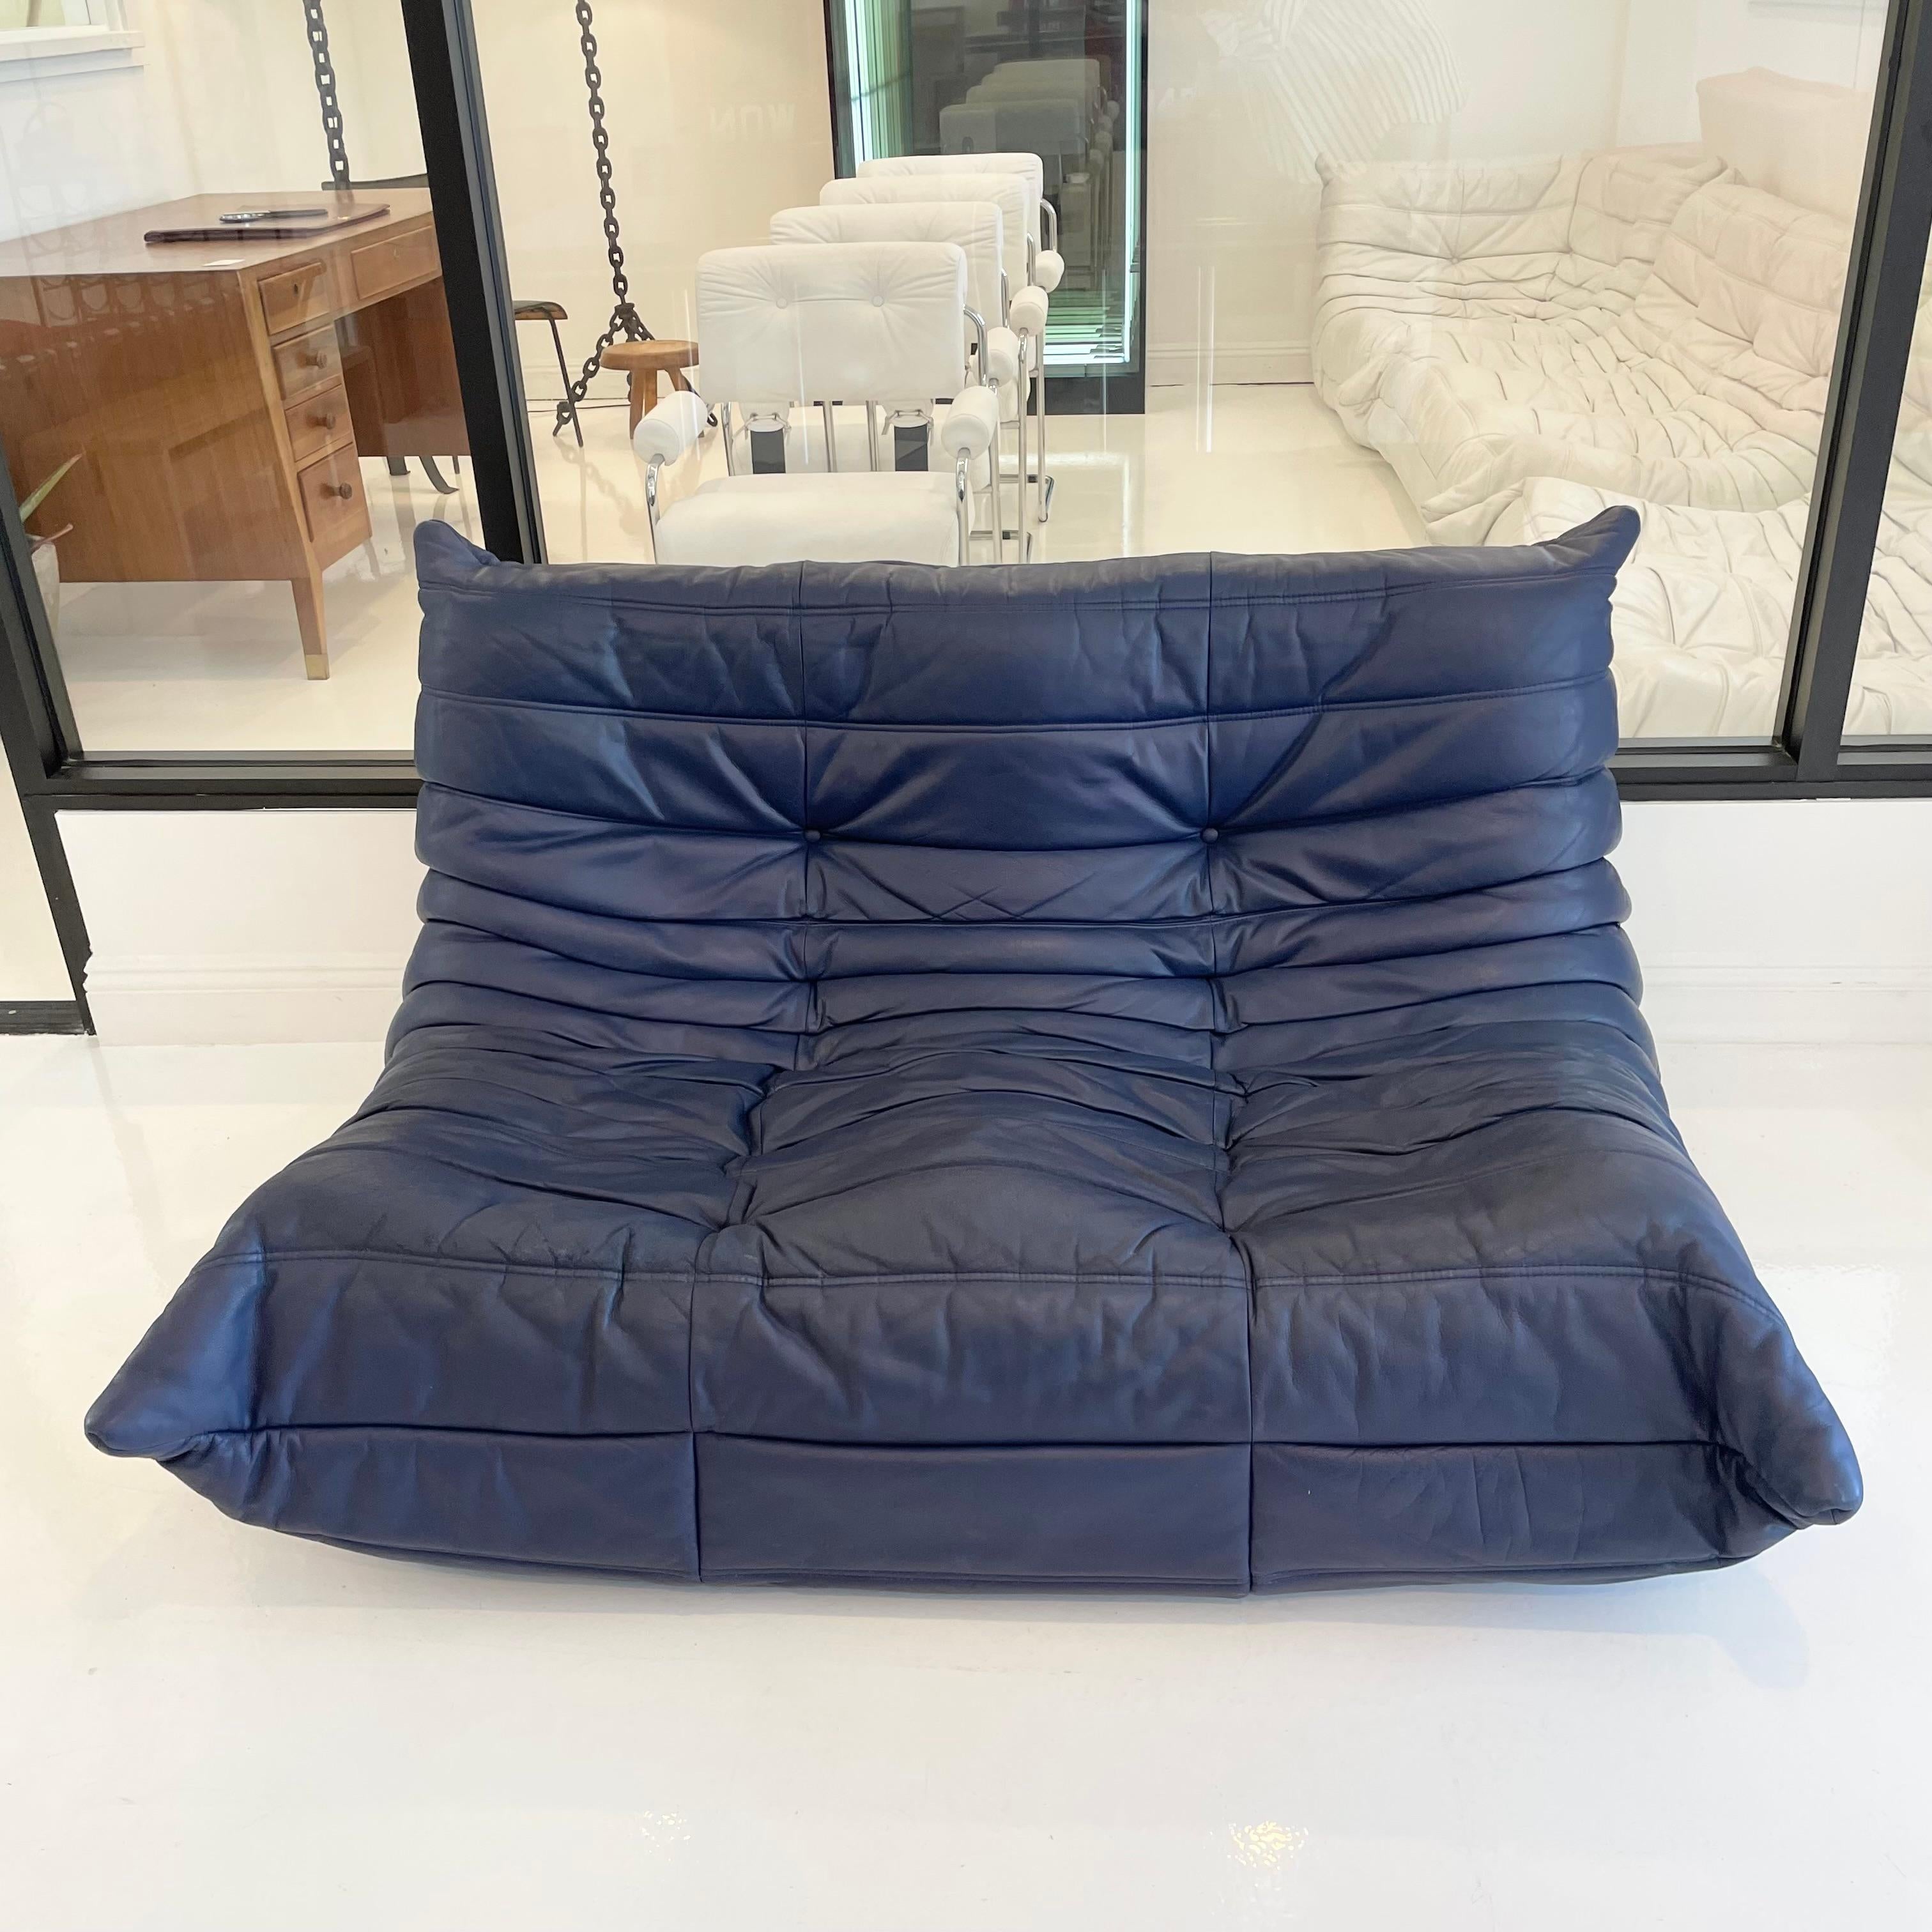 Classic French 2 seater Togo sofa by Michel Ducaroy for luxury brand Ligne Roset. Originally designed in the 1970s the iconic togo sofa is now a design classic. This sofa comes in its original blue leather and retains it's original fabric lining